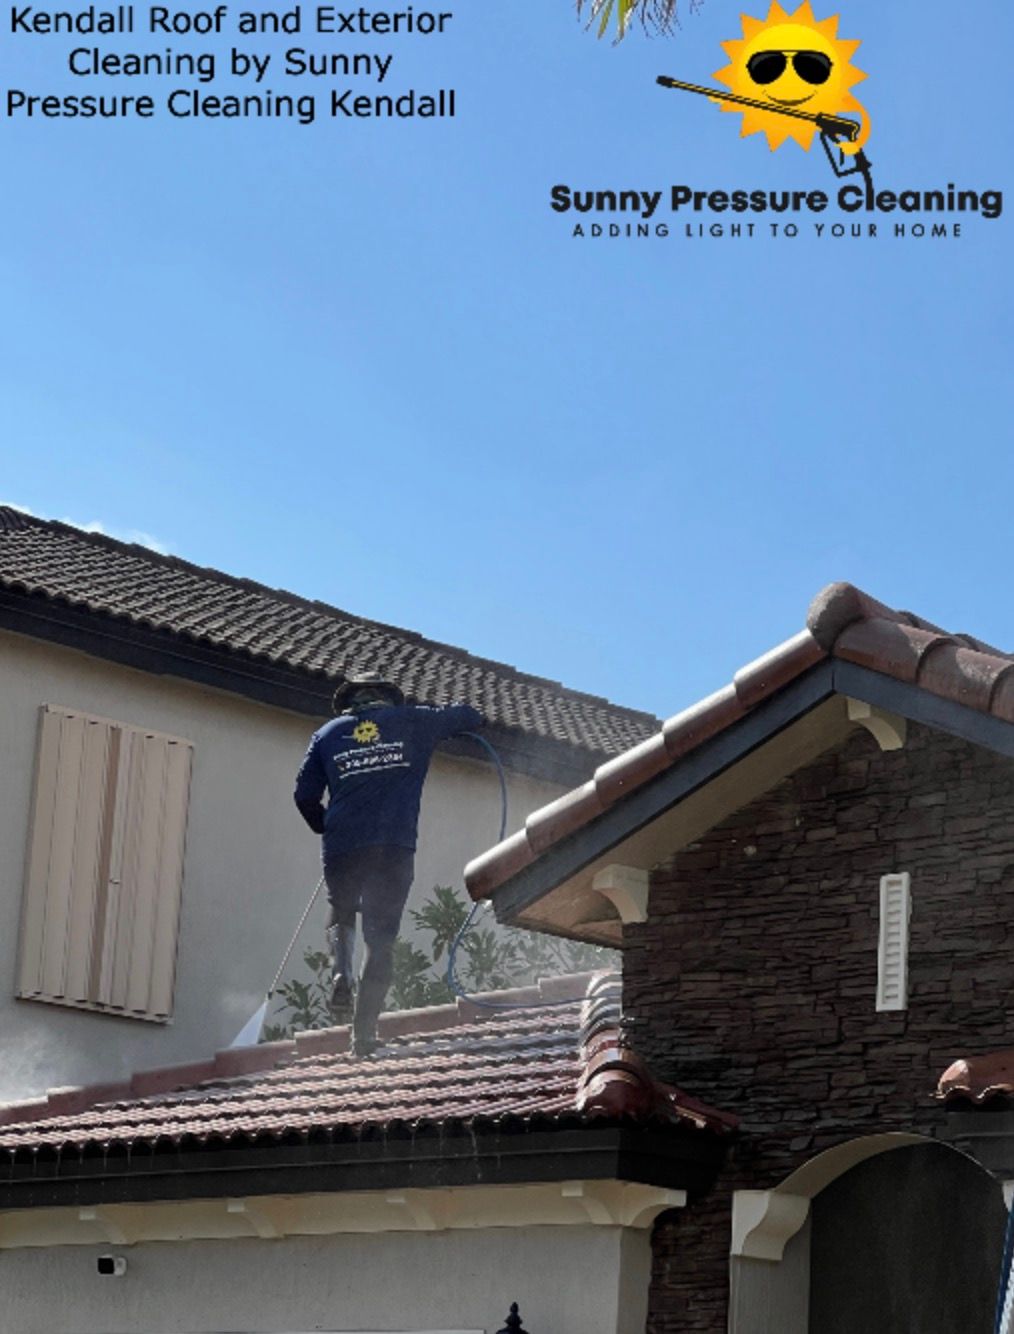 A roof cleaning service on a tile roof in Kendall Lakes Florida by Sunny Pressure Cleaning Kendall